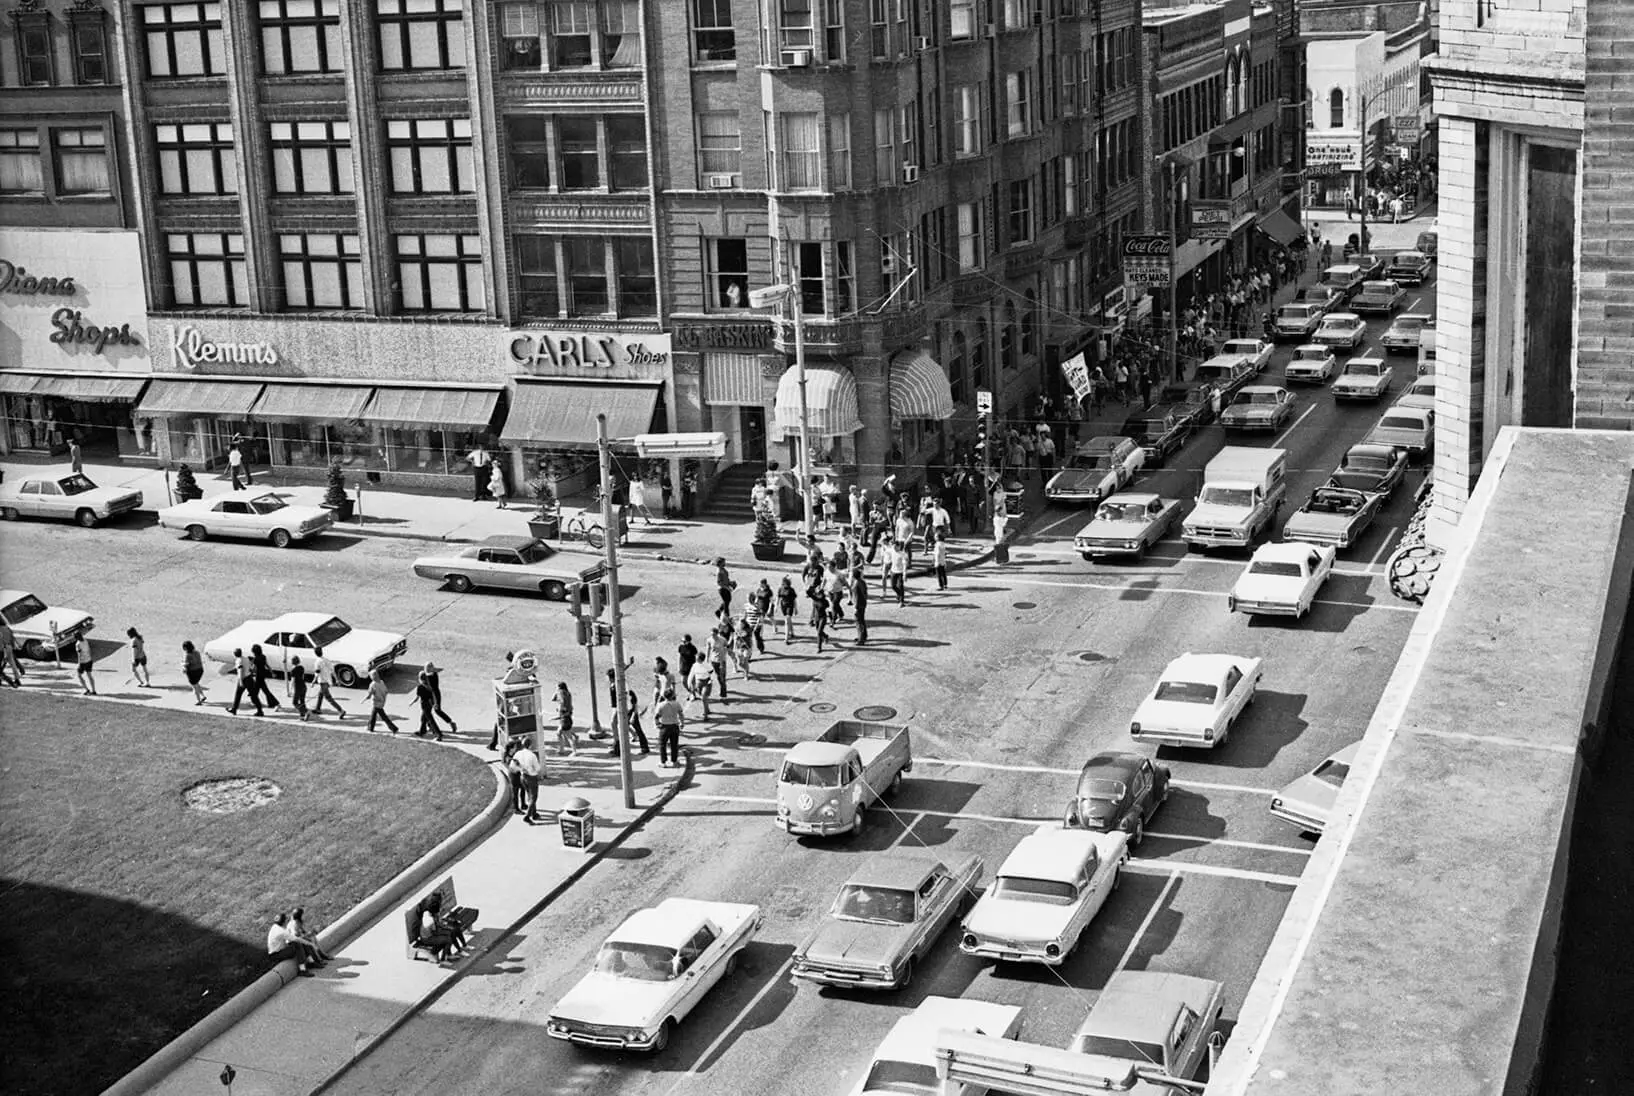 Photo taken from above of traffic and protesters, looking at the intersection of Jefferson and Main Streets. Bystanders not involved in the protest are observing from street benches. There are many cars on Main Street, traveling in both directions. Marchers can be seen as far as the eye can see on the sidewalk on Main St.